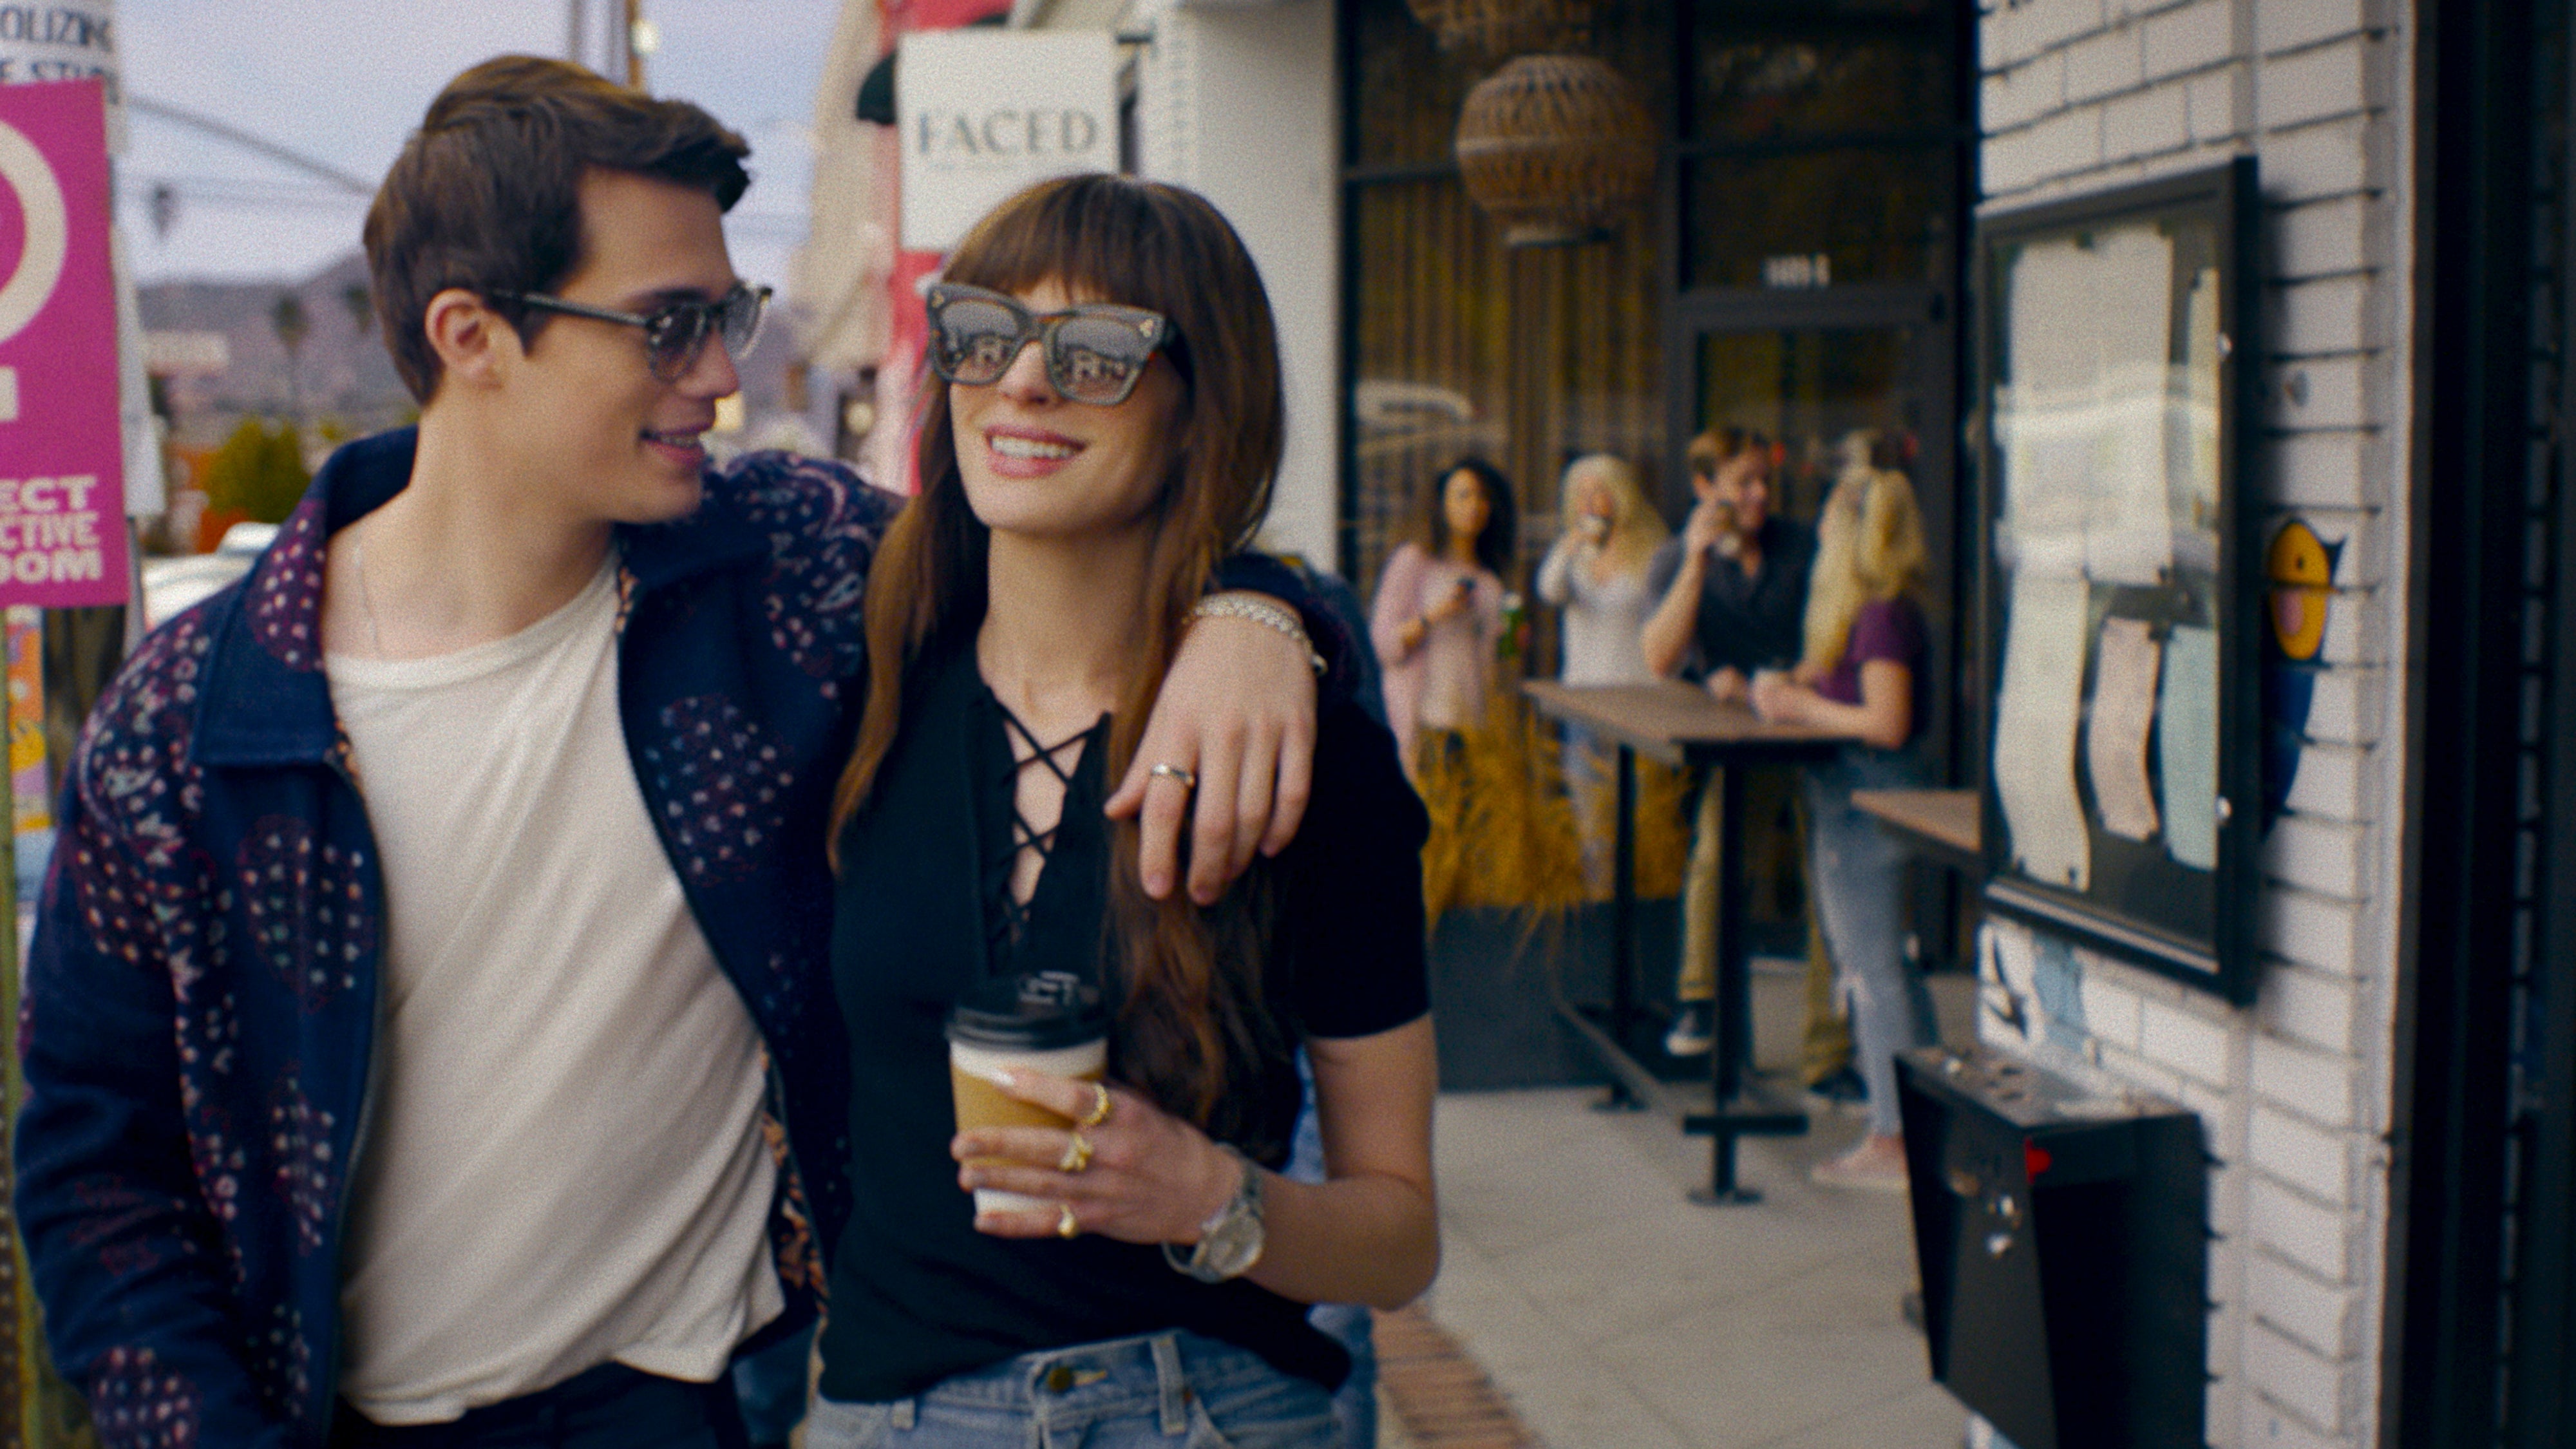 Galitzine and Hathaway walk down a busy street holding coffees and wearing sunglasses; his arm is over her shoulders.